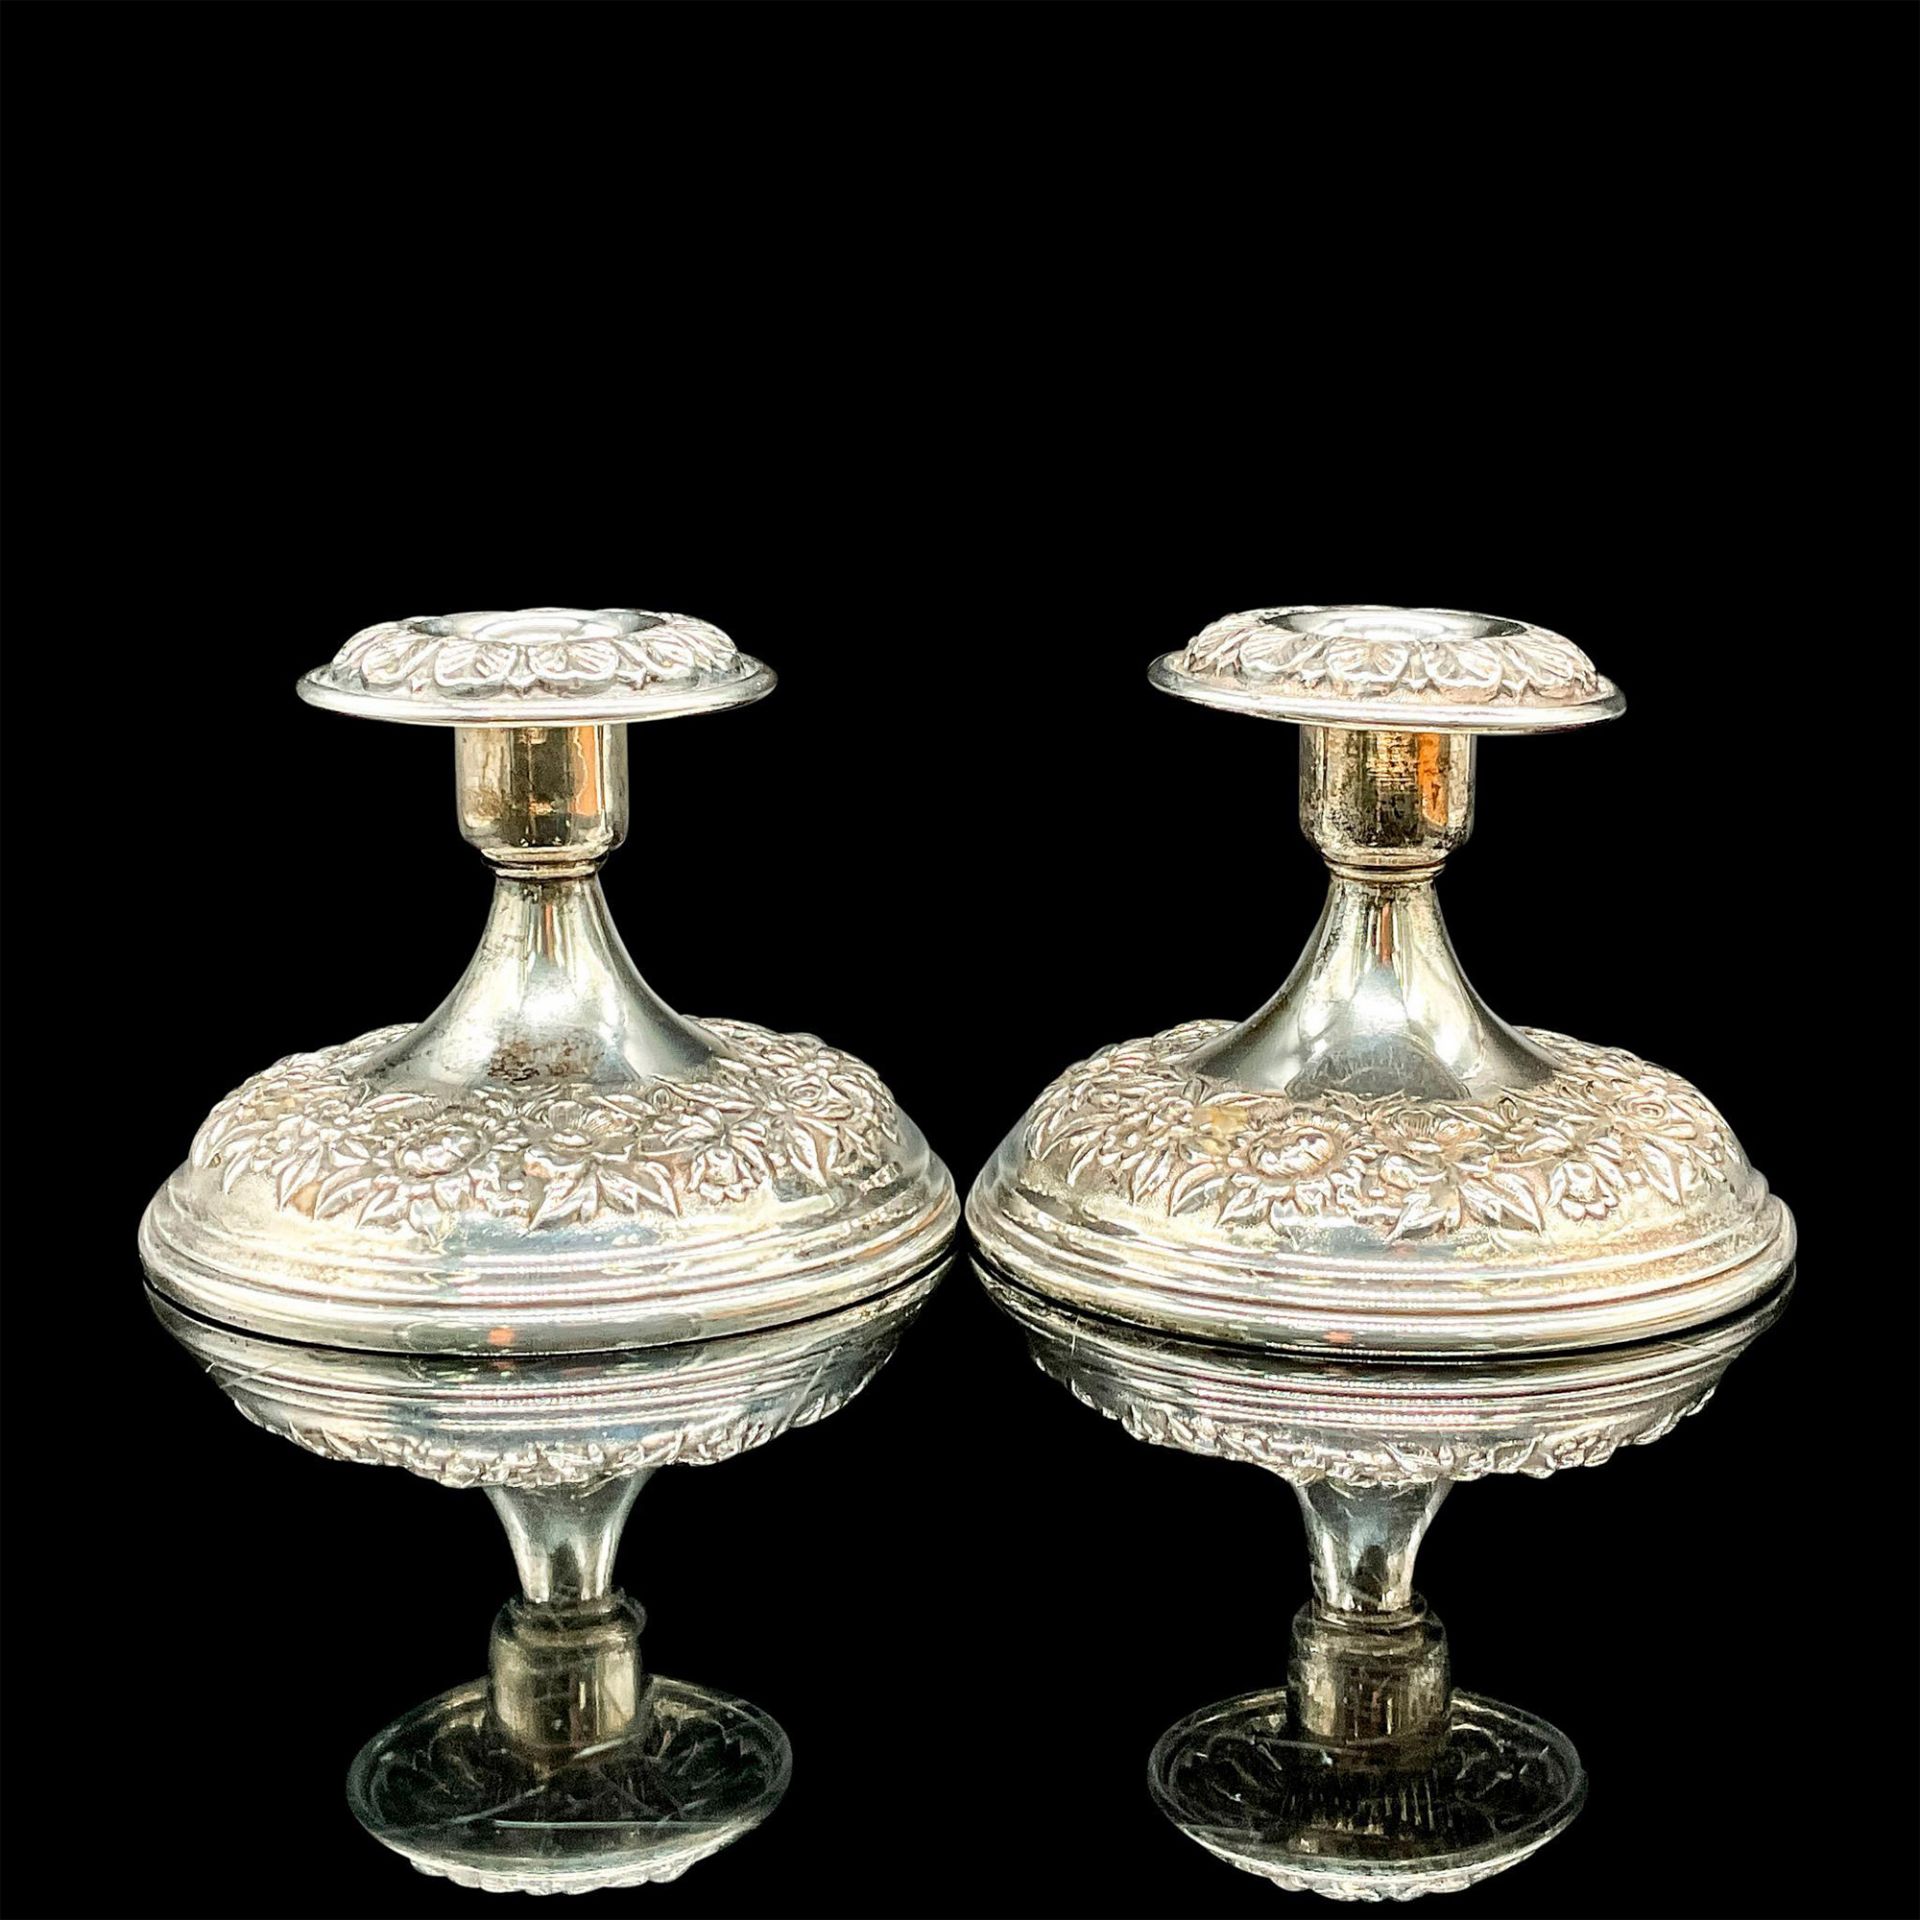 2pc S Kirk & Son Sterling Silver Weighted Candle Holders - Image 2 of 3